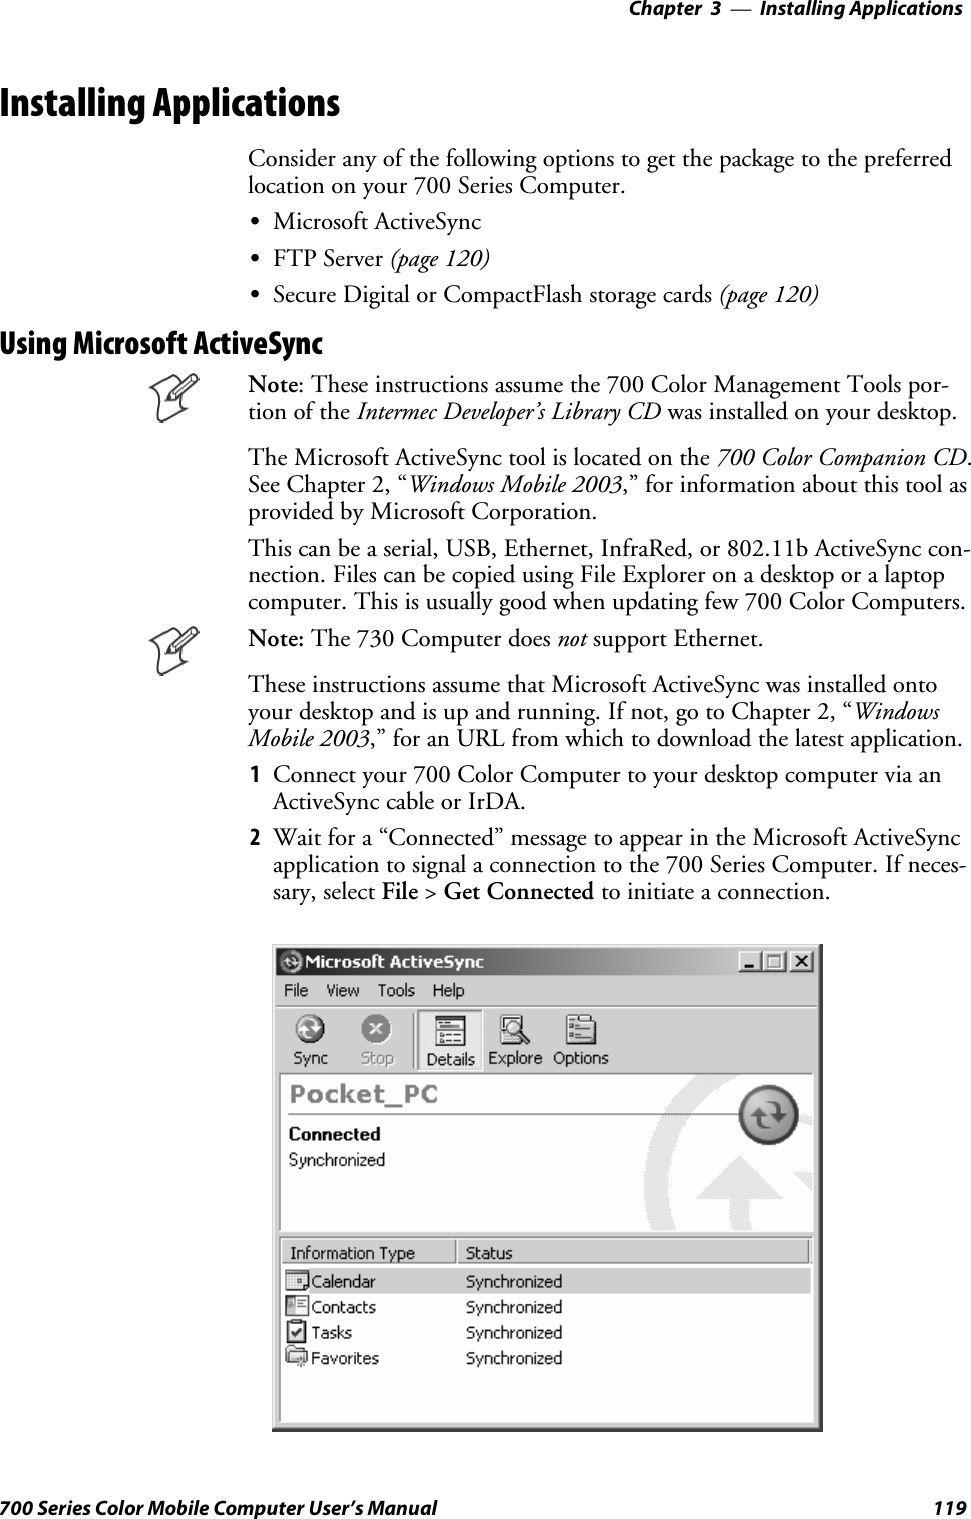 Installing Applications—Chapter 3119700 Series Color Mobile Computer User’s ManualInstalling ApplicationsConsider any of the following options to get the package to the preferredlocation on your 700 Series Computer.SMicrosoft ActiveSyncSFTP Server (page 120)SSecure Digital or CompactFlash storage cards (page 120)Using Microsoft ActiveSyncNote: These instructions assume the 700 Color Management Tools por-tion of the Intermec Developer’s Library CD was installed on your desktop.The Microsoft ActiveSync tool is located on the 700 Color Companion CD.See Chapter 2, “Windows Mobile 2003,” for information about this tool asprovided by Microsoft Corporation.This can be a serial, USB, Ethernet, InfraRed, or 802.11b ActiveSync con-nection. Files can be copied using File Explorer on a desktop or a laptopcomputer. This is usually good when updating few 700 Color Computers.Note: The 730 Computer does not support Ethernet.These instructions assume that Microsoft ActiveSync was installed ontoyourdesktopandisupandrunning.Ifnot,gotoChapter2,“WindowsMobile 2003,” for an URL from which to download the latest application.1Connect your 700 Color Computer to your desktop computer via anActiveSync cable or IrDA.2Wait for a “Connected” message to appear in the Microsoft ActiveSyncapplication to signal a connection to the 700 Series Computer. If neces-sary, select File &gt;Get Connected to initiate a connection.